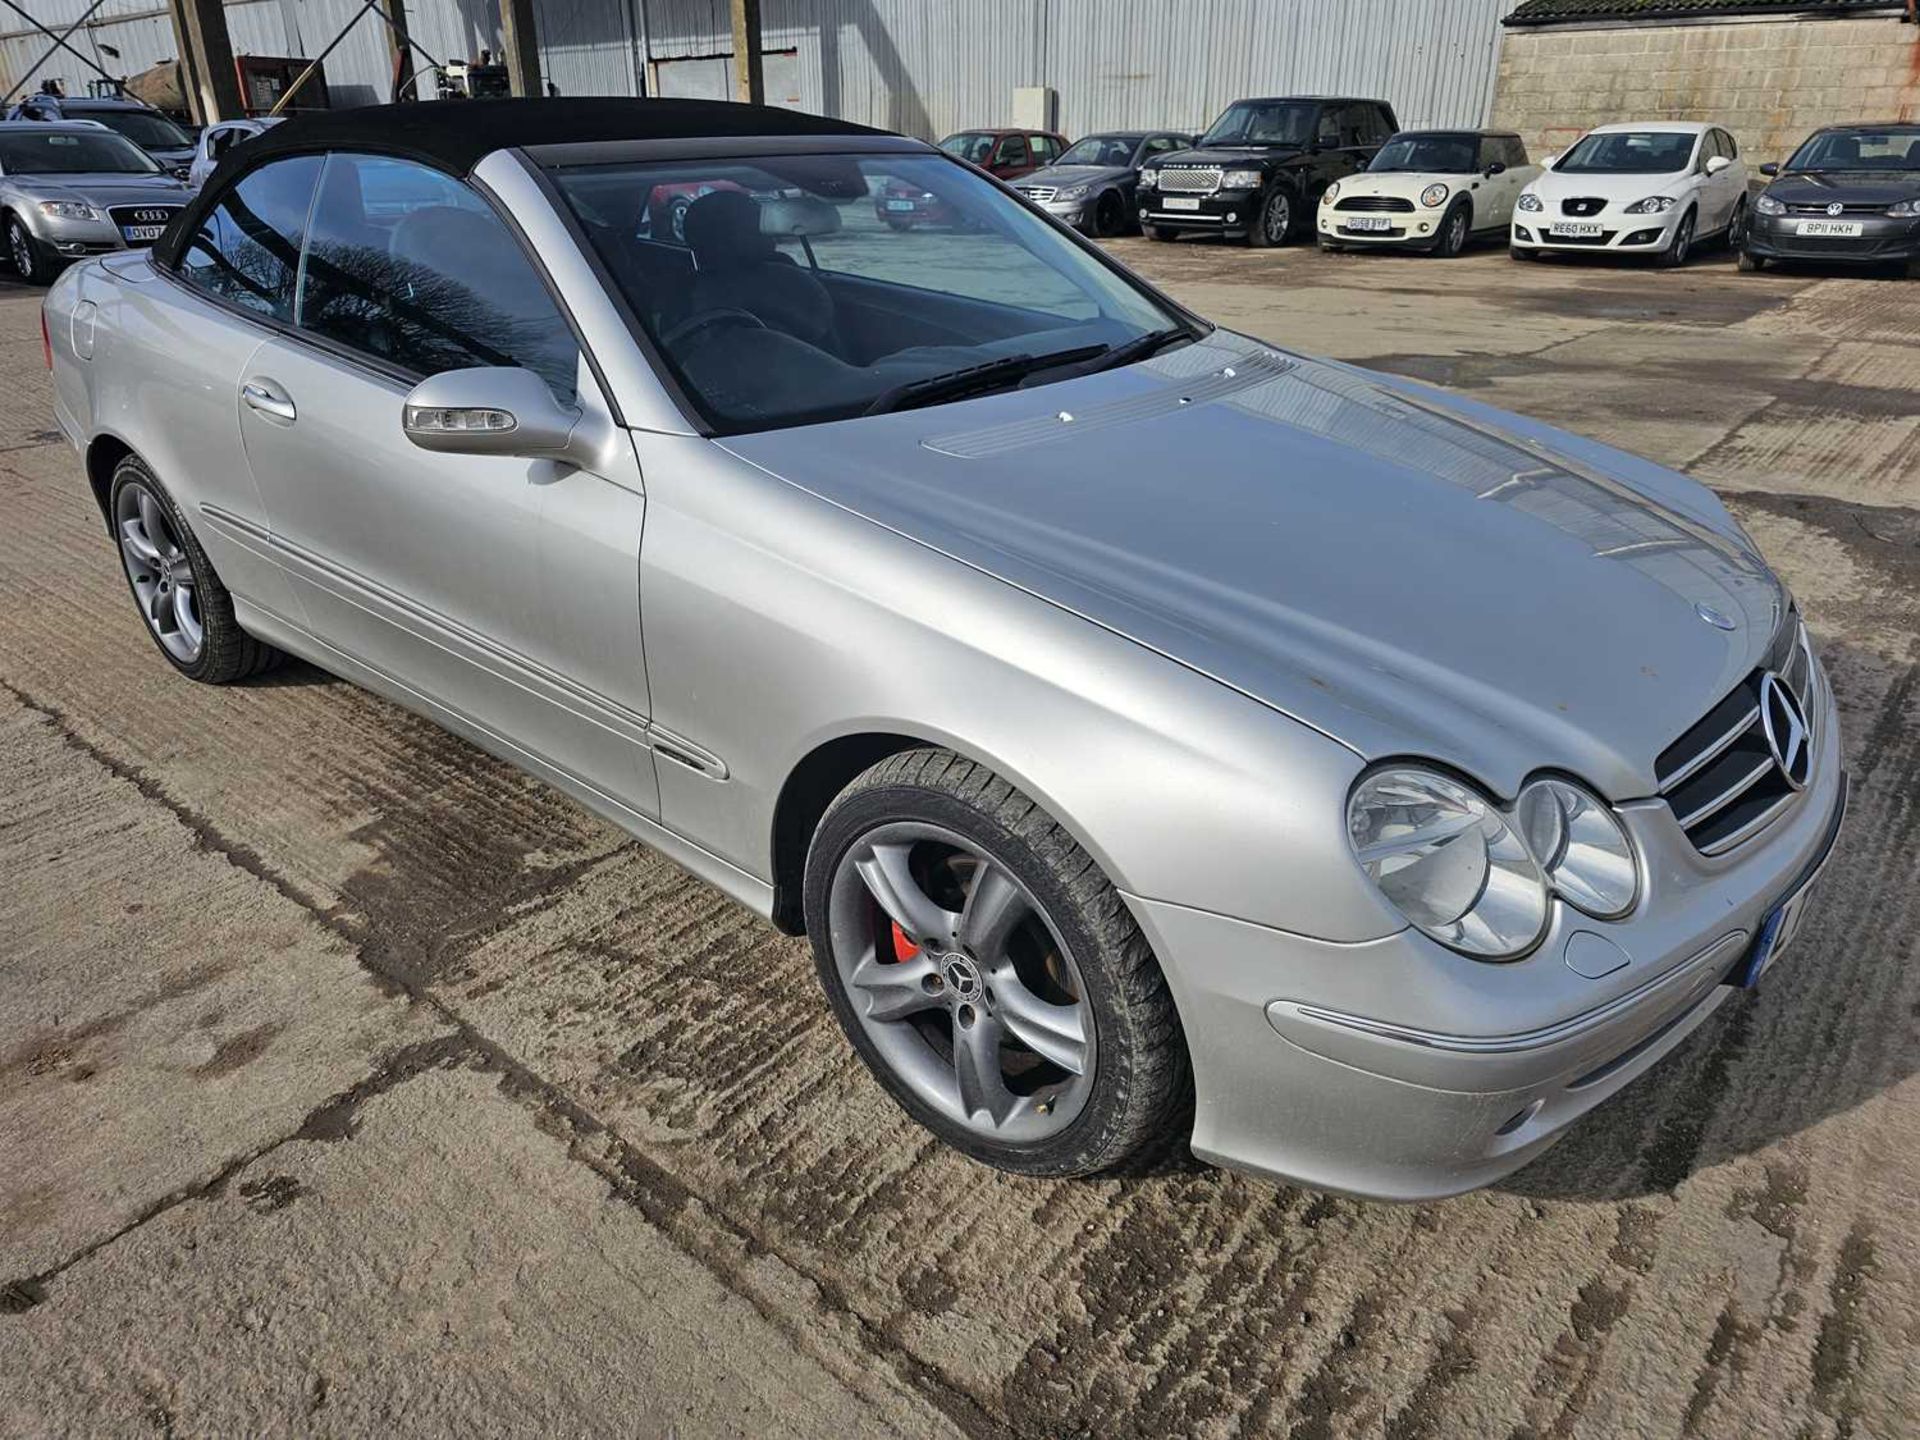 2005 Mercedes CLK200 Kompressor, Convertible, Auto, Full Leather, Bluetooth, Cruise Control, Climate - Image 8 of 29